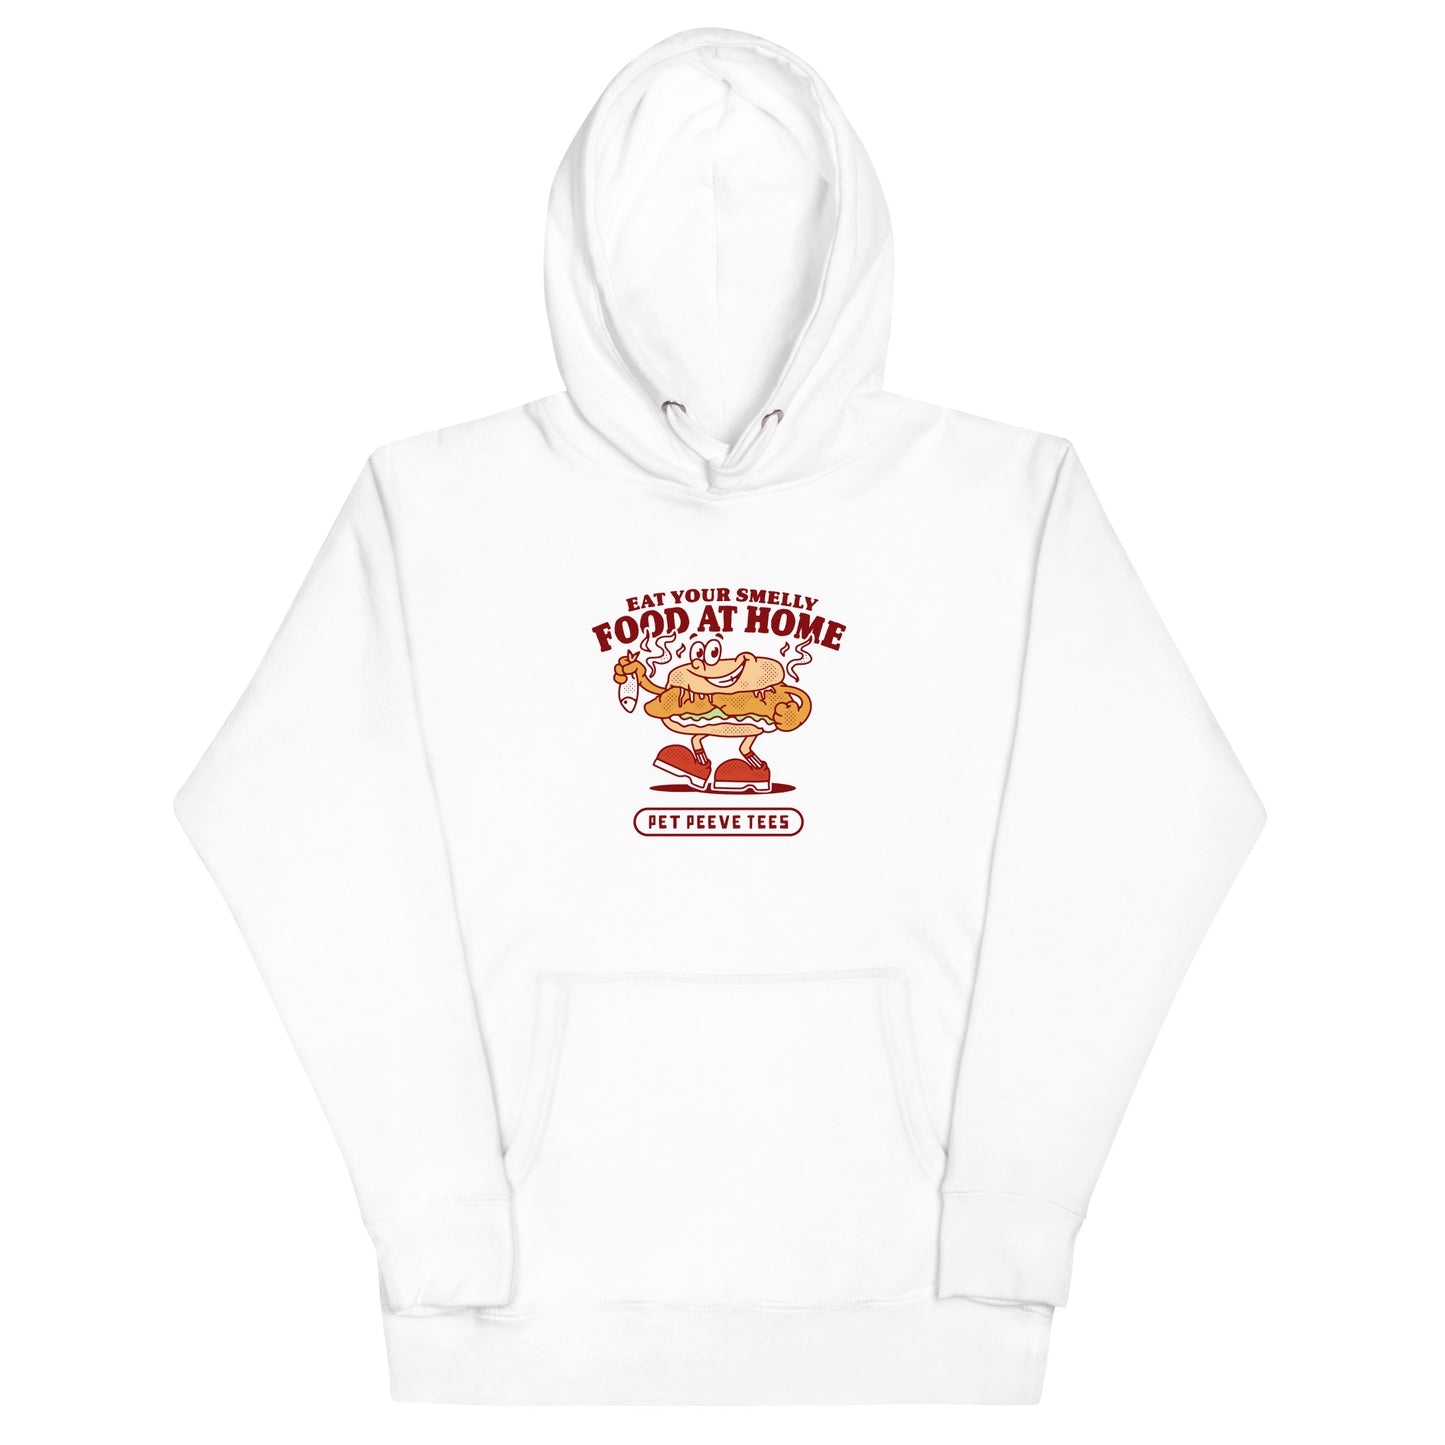 Eat Your Smelly Food At Home - Pet Peeve Tee - Unisex Hoodie